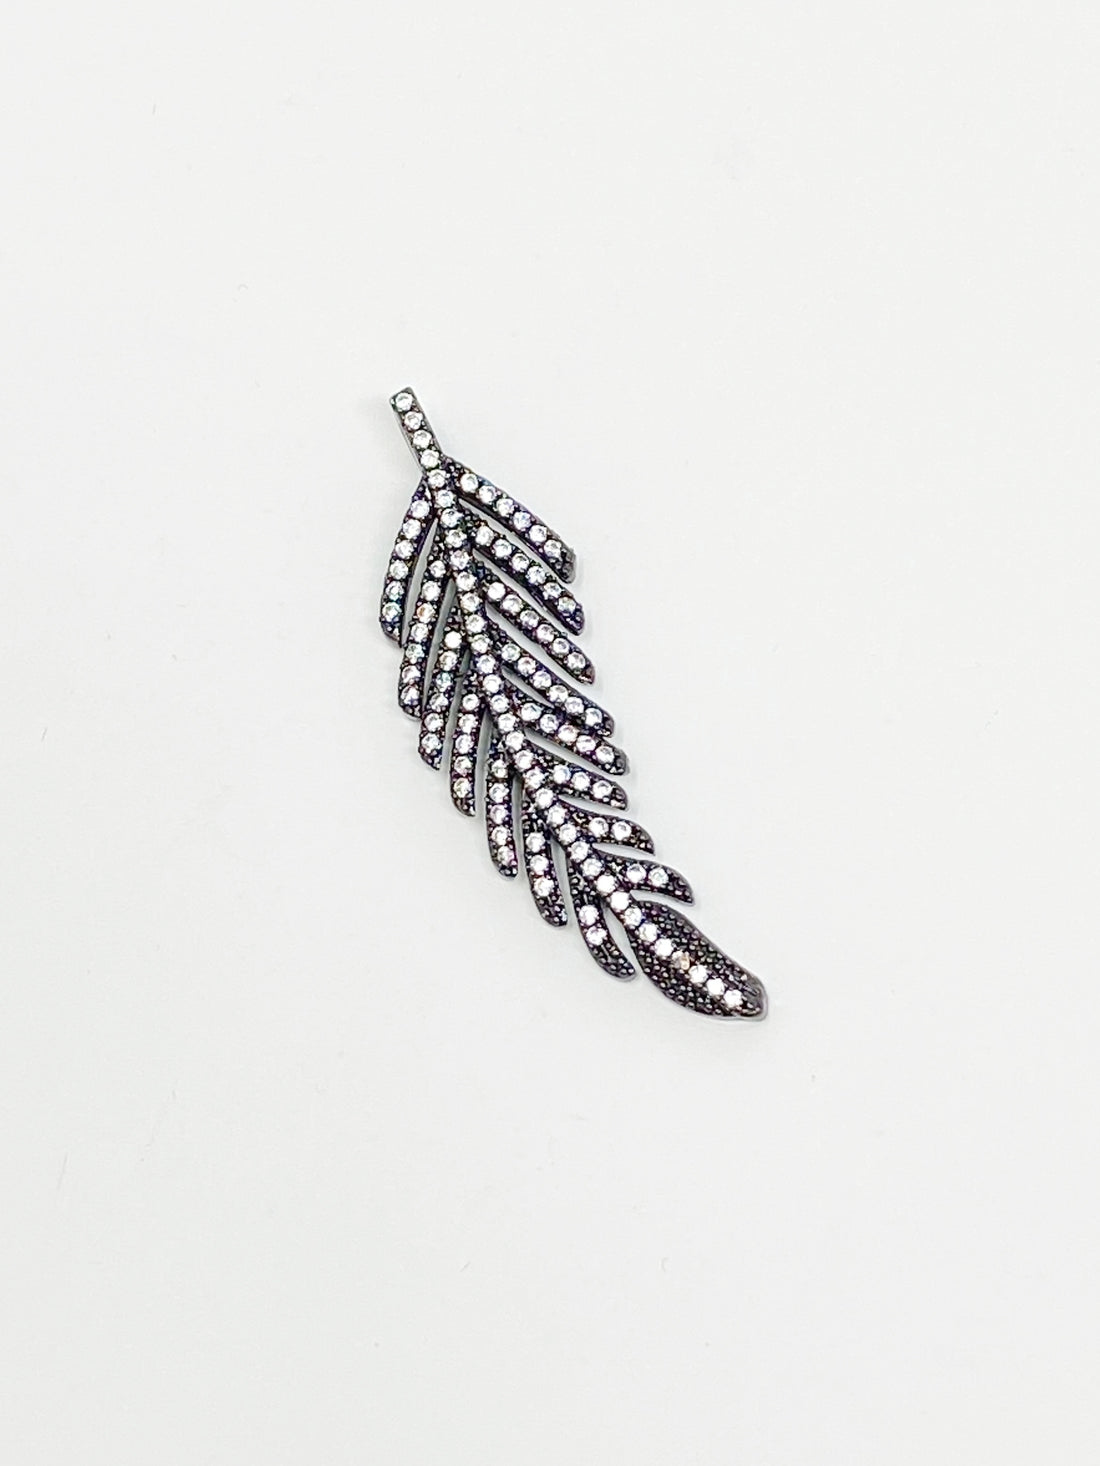 Charming Pave Feather Charm in Gunmetal